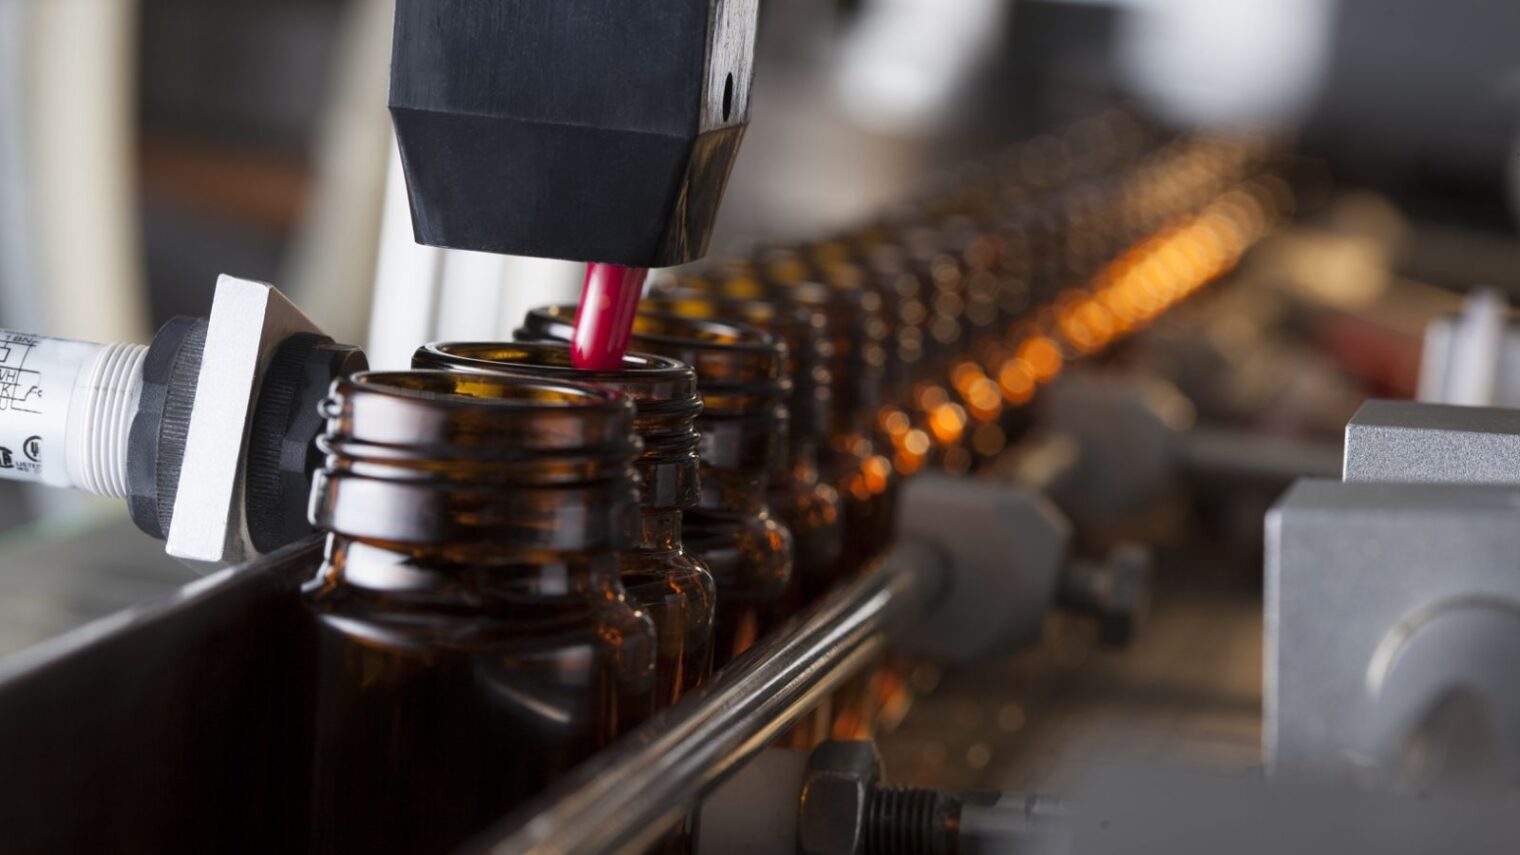 The Induction Integrity Verification System checks every bottle after it’s sealed. Image via Shutterstock.com